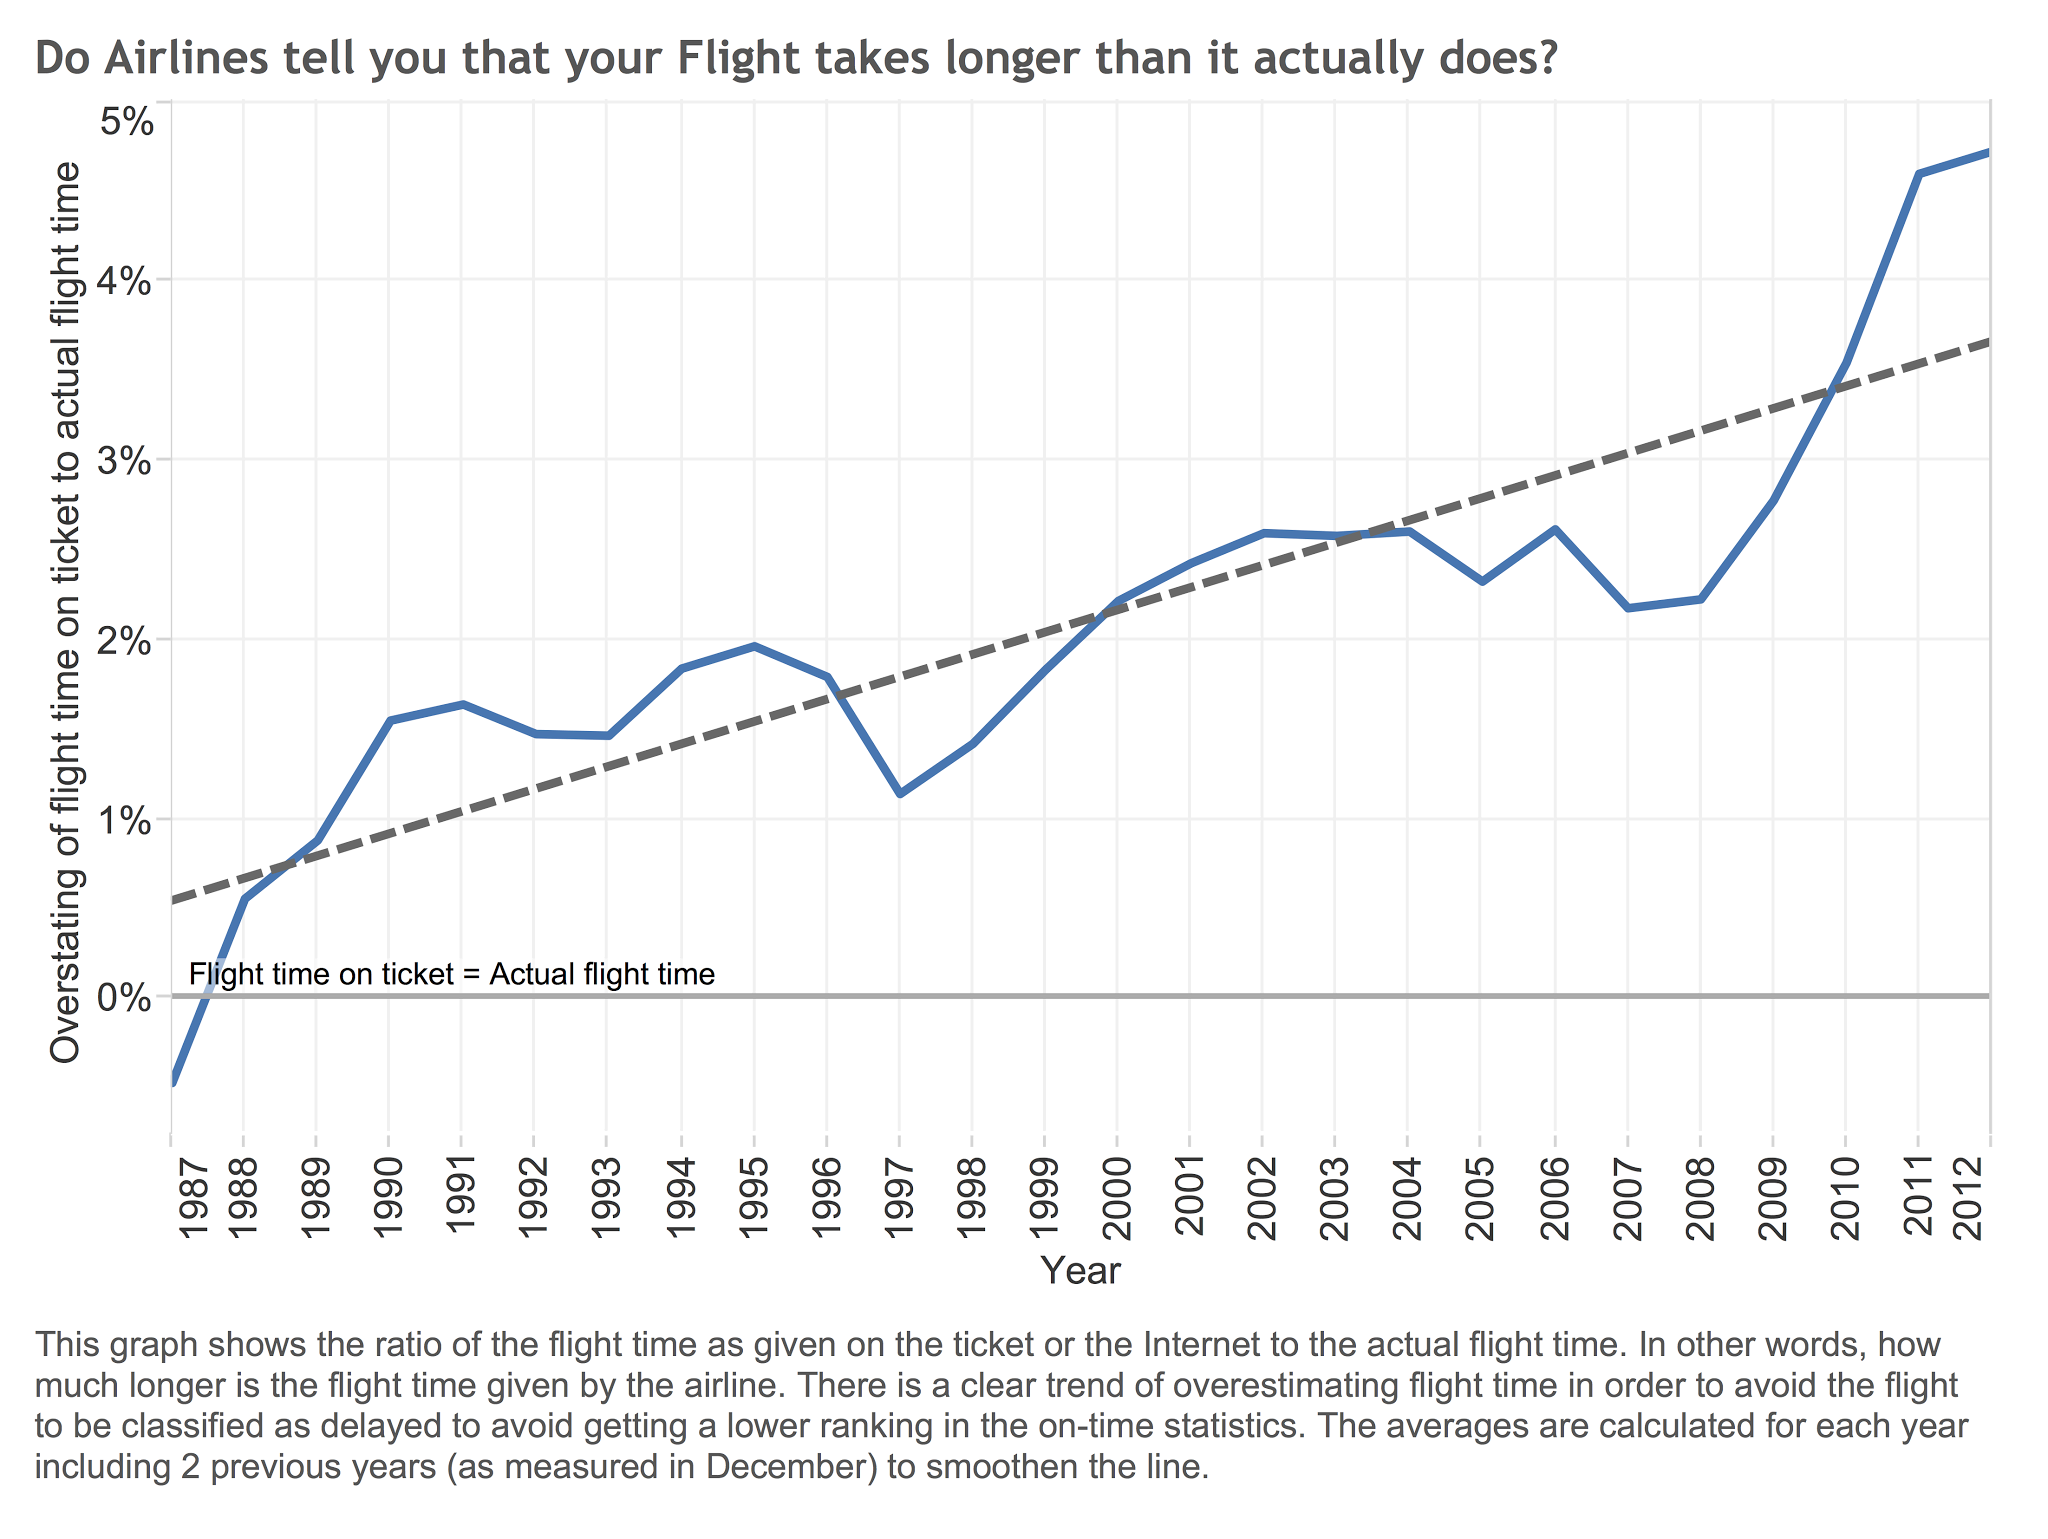 Airlines overestimate flight times.